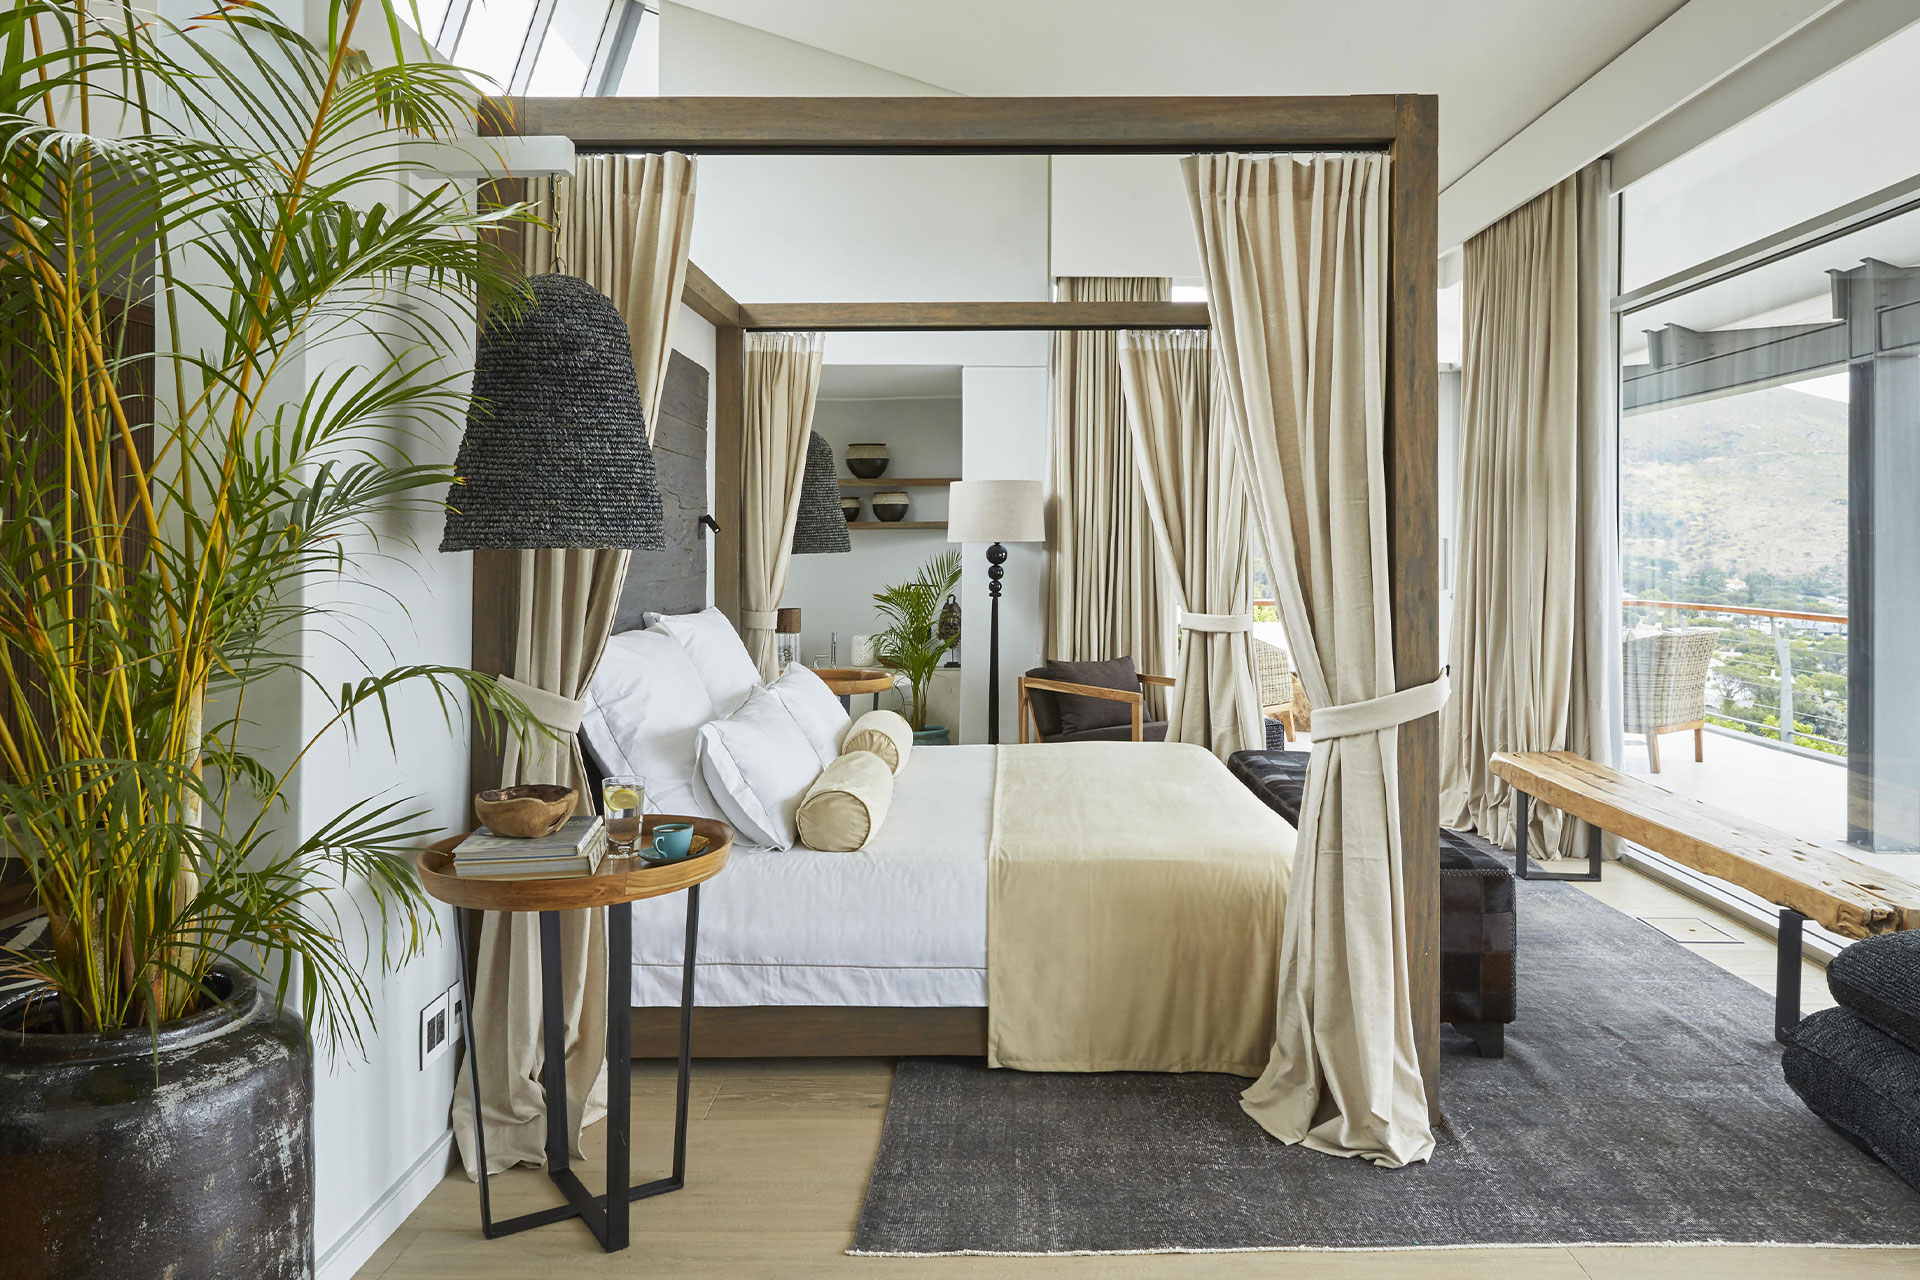 A luxurious bedroom suite with a view at The Residence by Atzaró in Cape Town, South Africa.